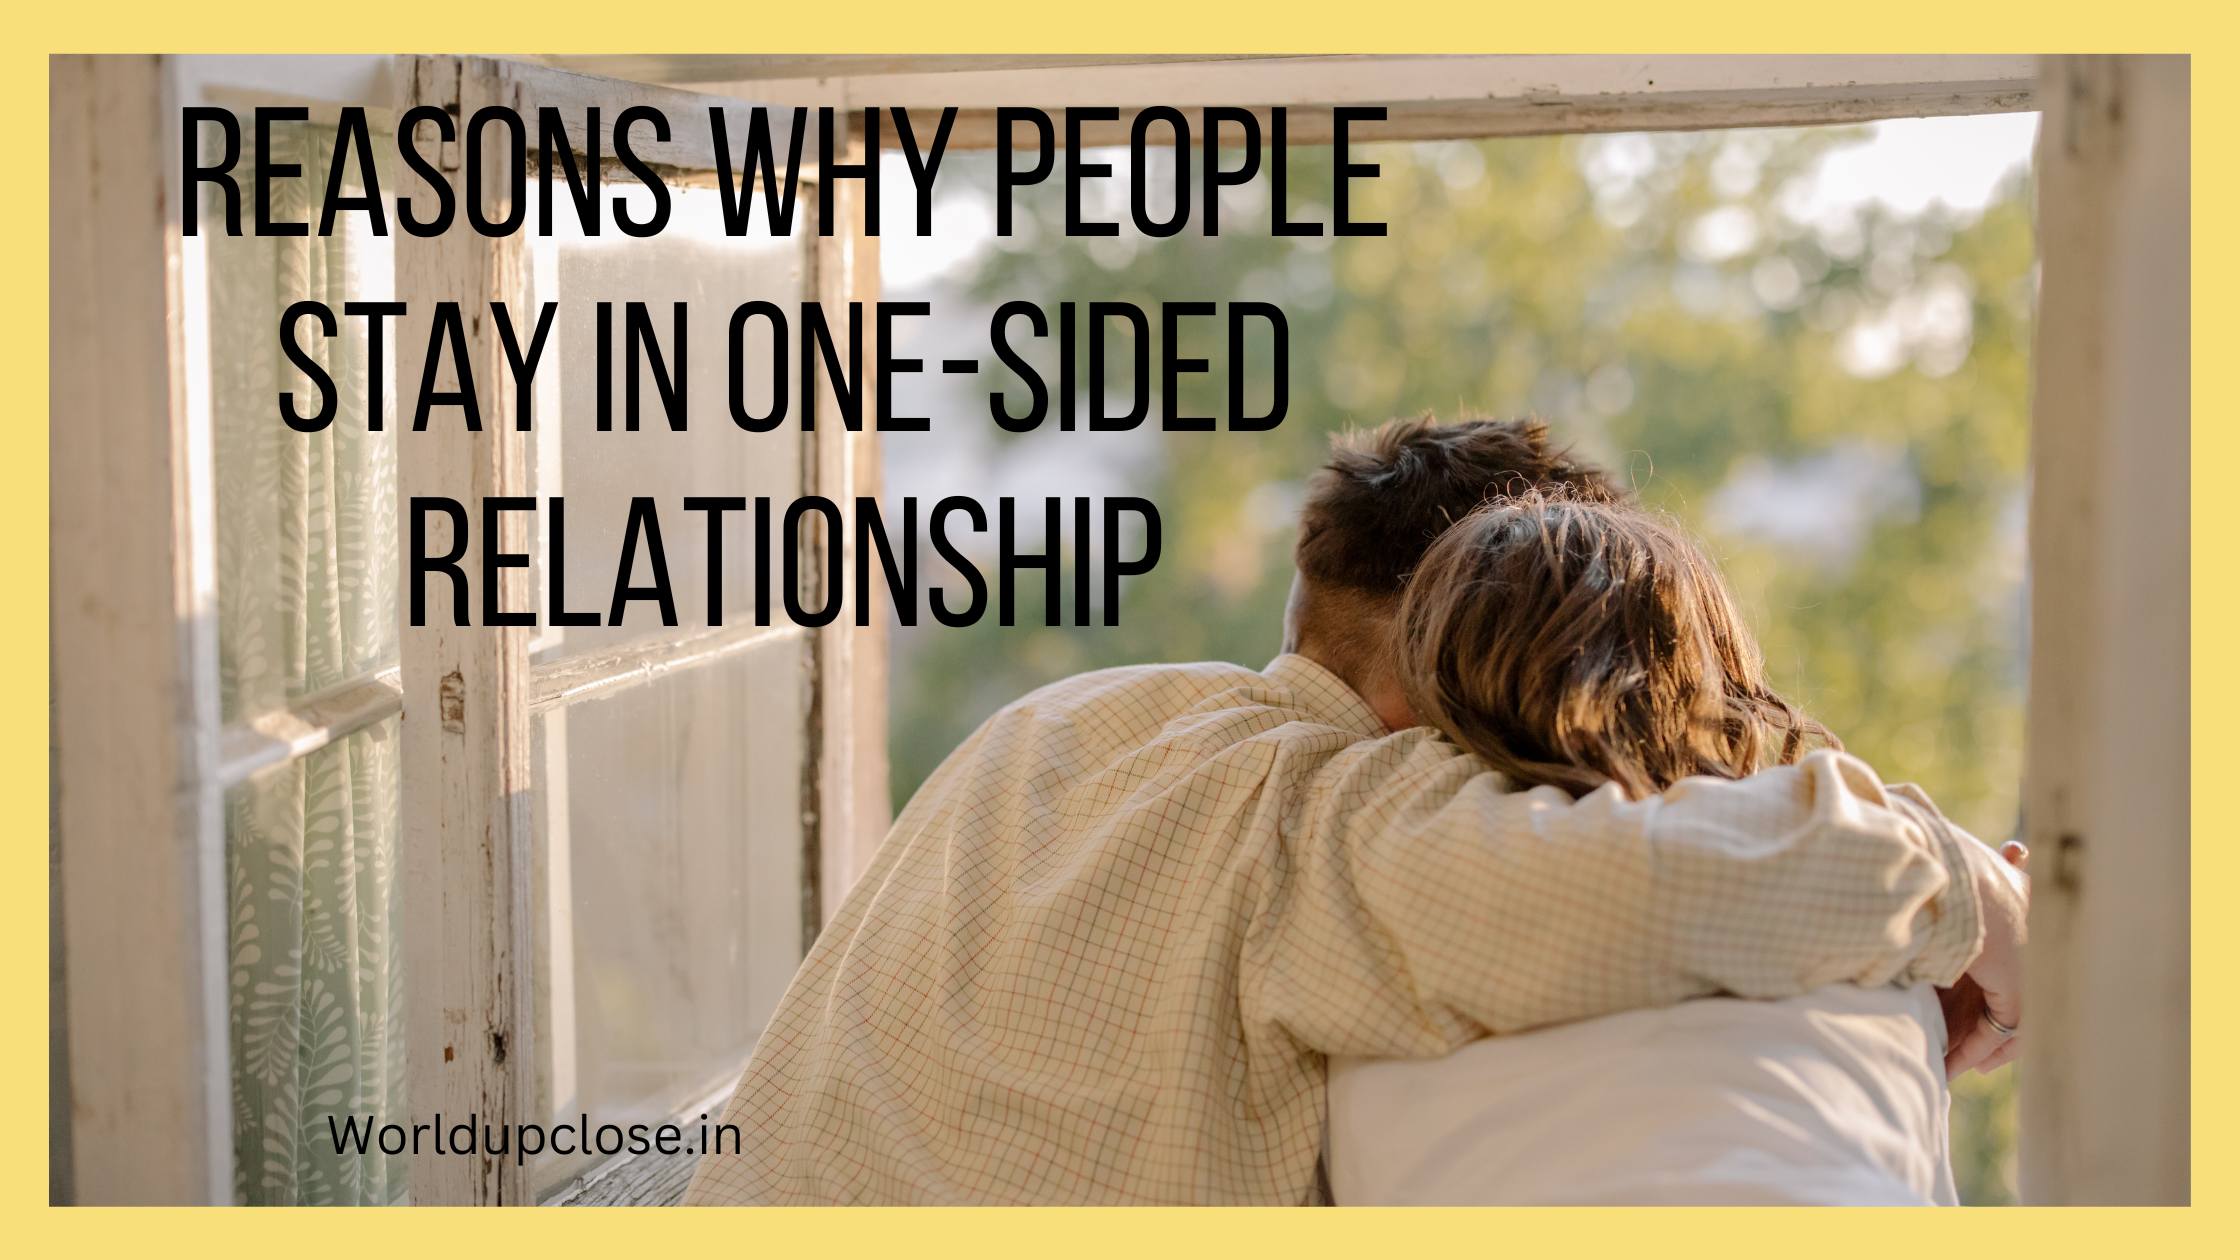 4 Reasons some people stay in one-sided relationships? 1